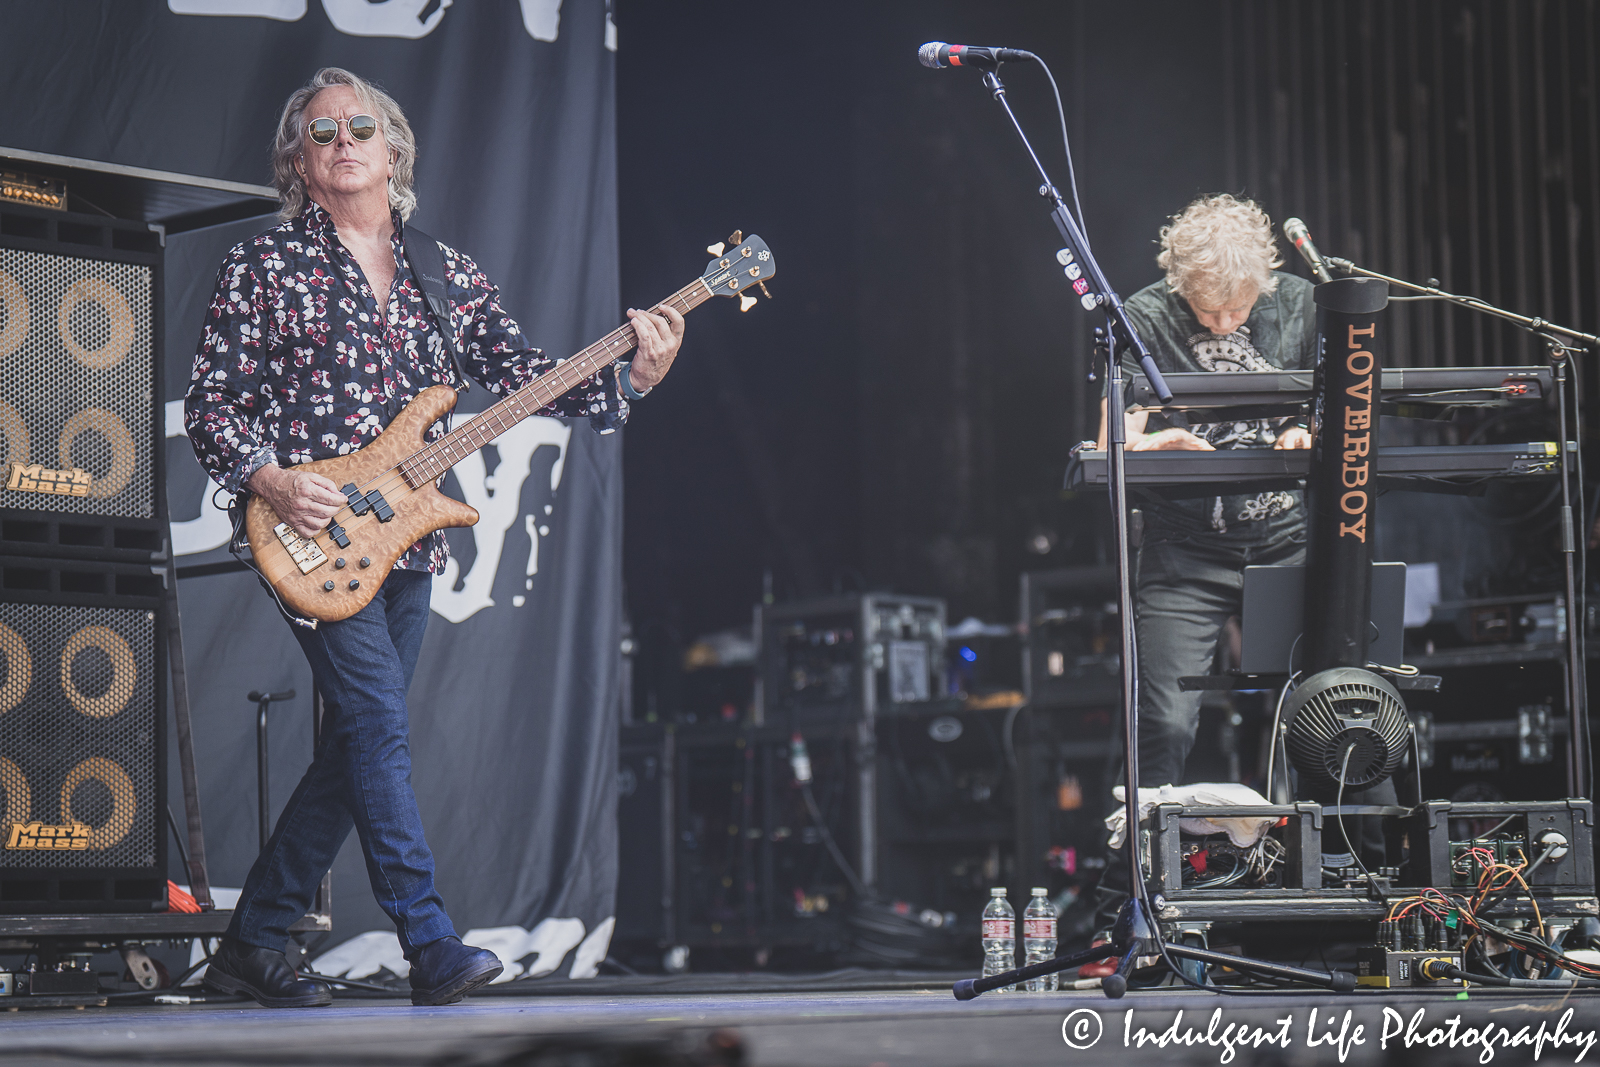 Loverboy bass guitarist Ken "Spider" Sinnaeve and keyboard player Doug Johnson performing together at Starlight Theatre in Kansas City, MO on June 14, 2022.